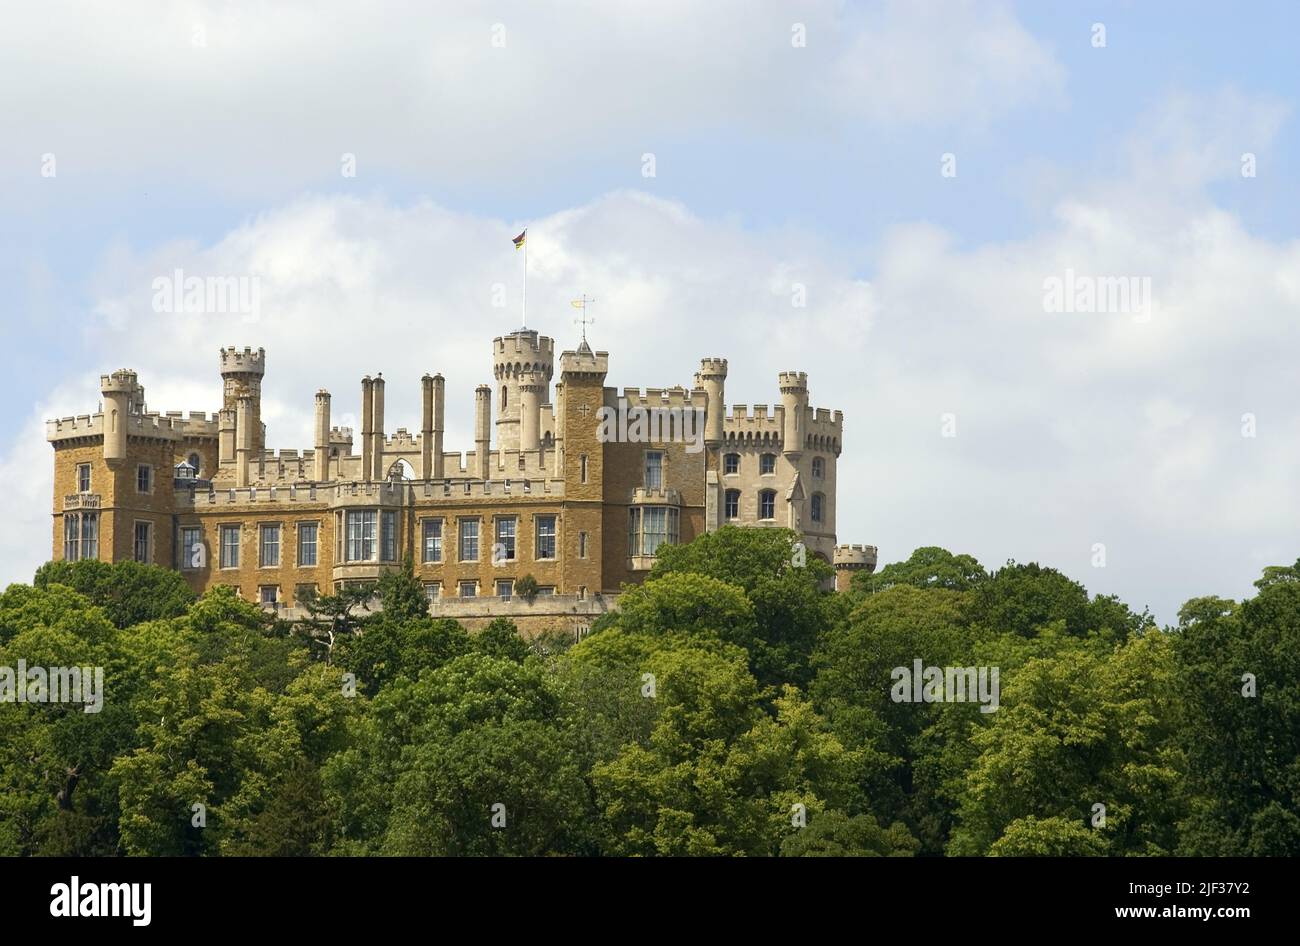 Belvoir Castle in Leicestershire, United Kingdom, England Stock Photo